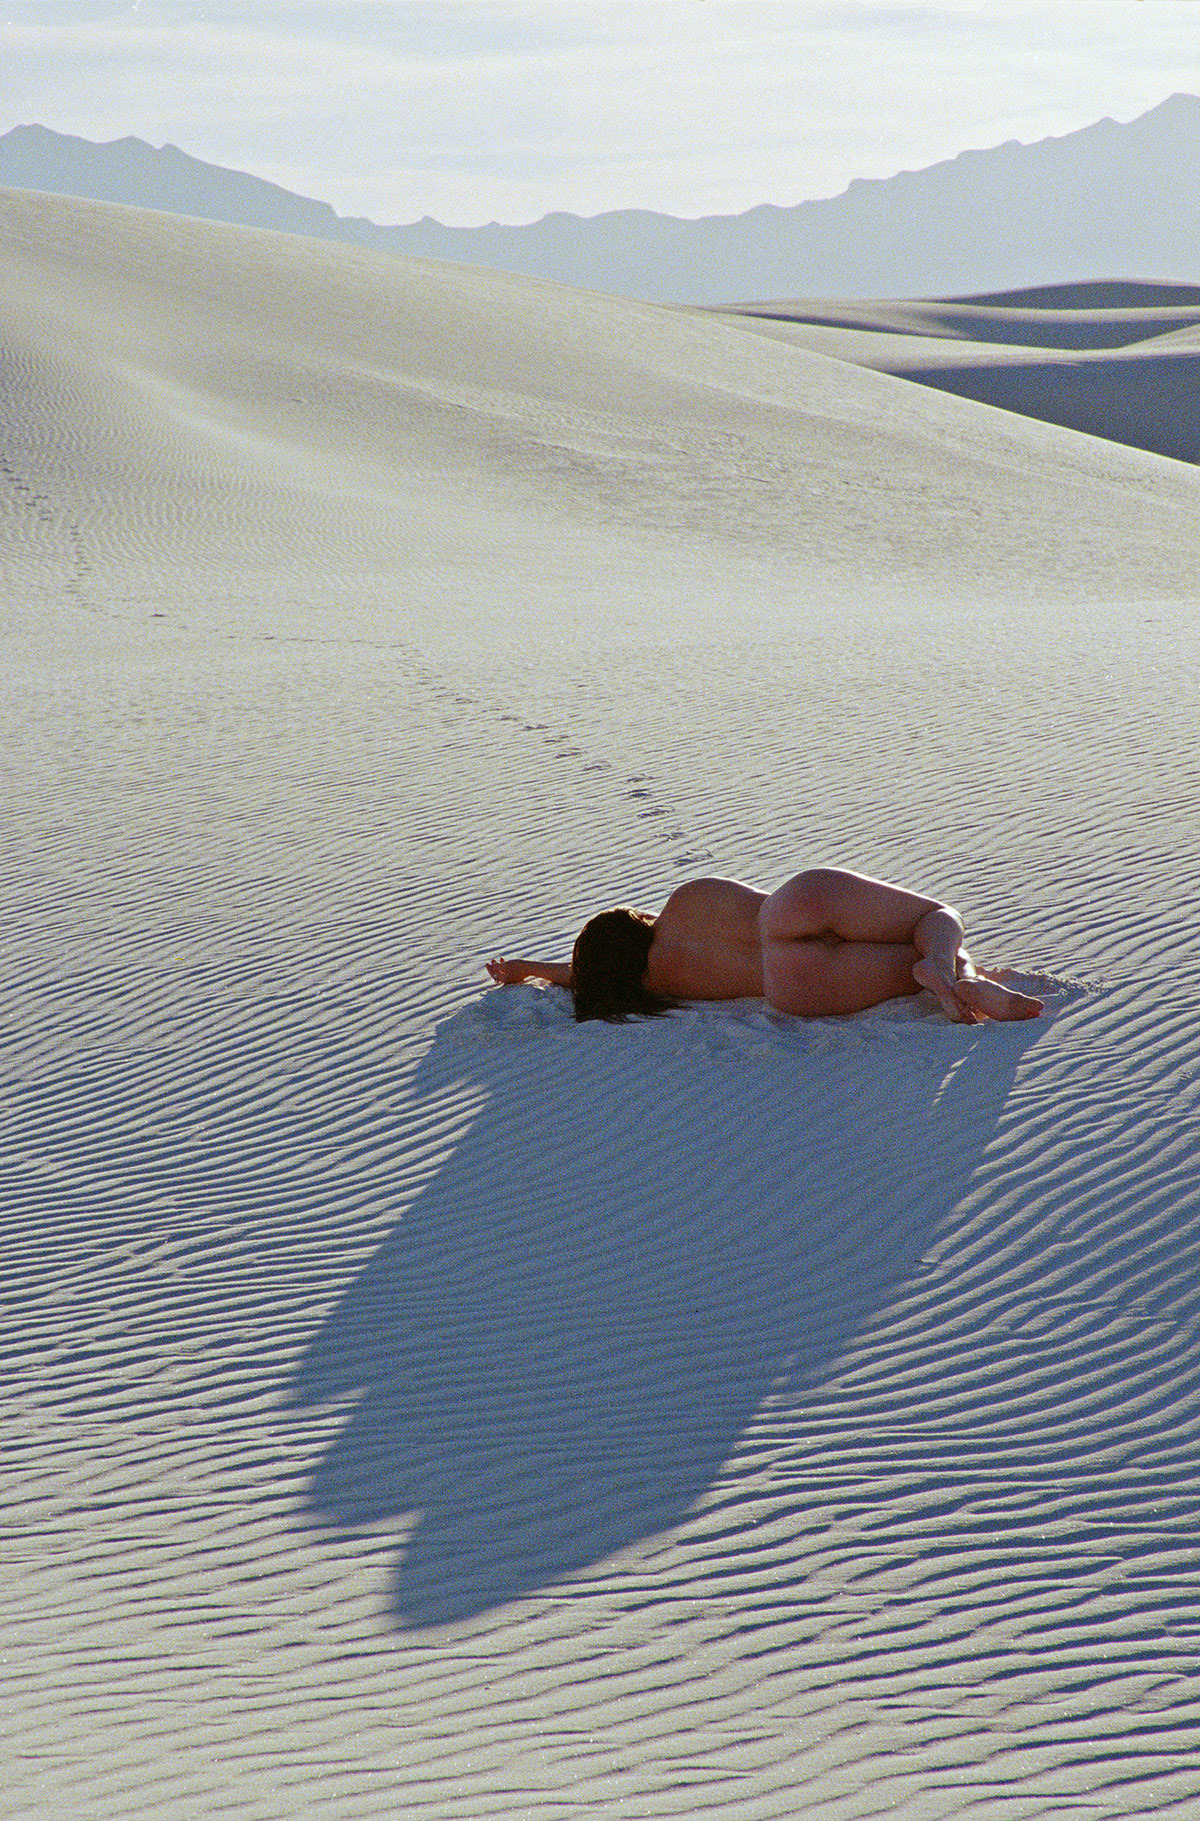 White sands nudes